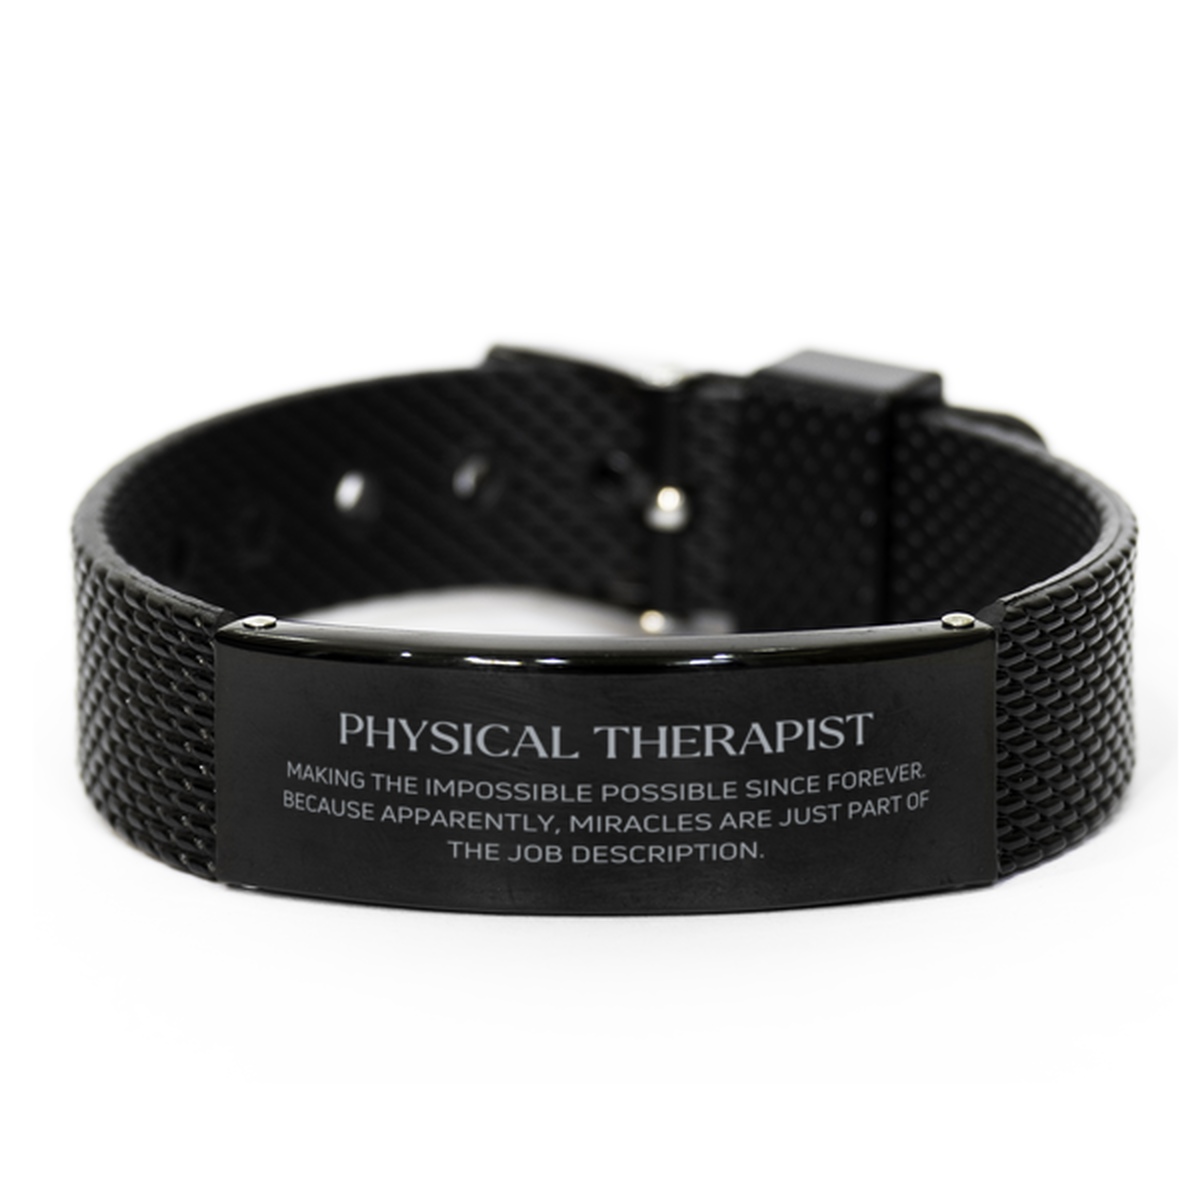 Funny Physical Therapist Gifts, Miracles are just part of the job description, Inspirational Birthday Black Shark Mesh Bracelet For Physical Therapist, Men, Women, Coworkers, Friends, Boss